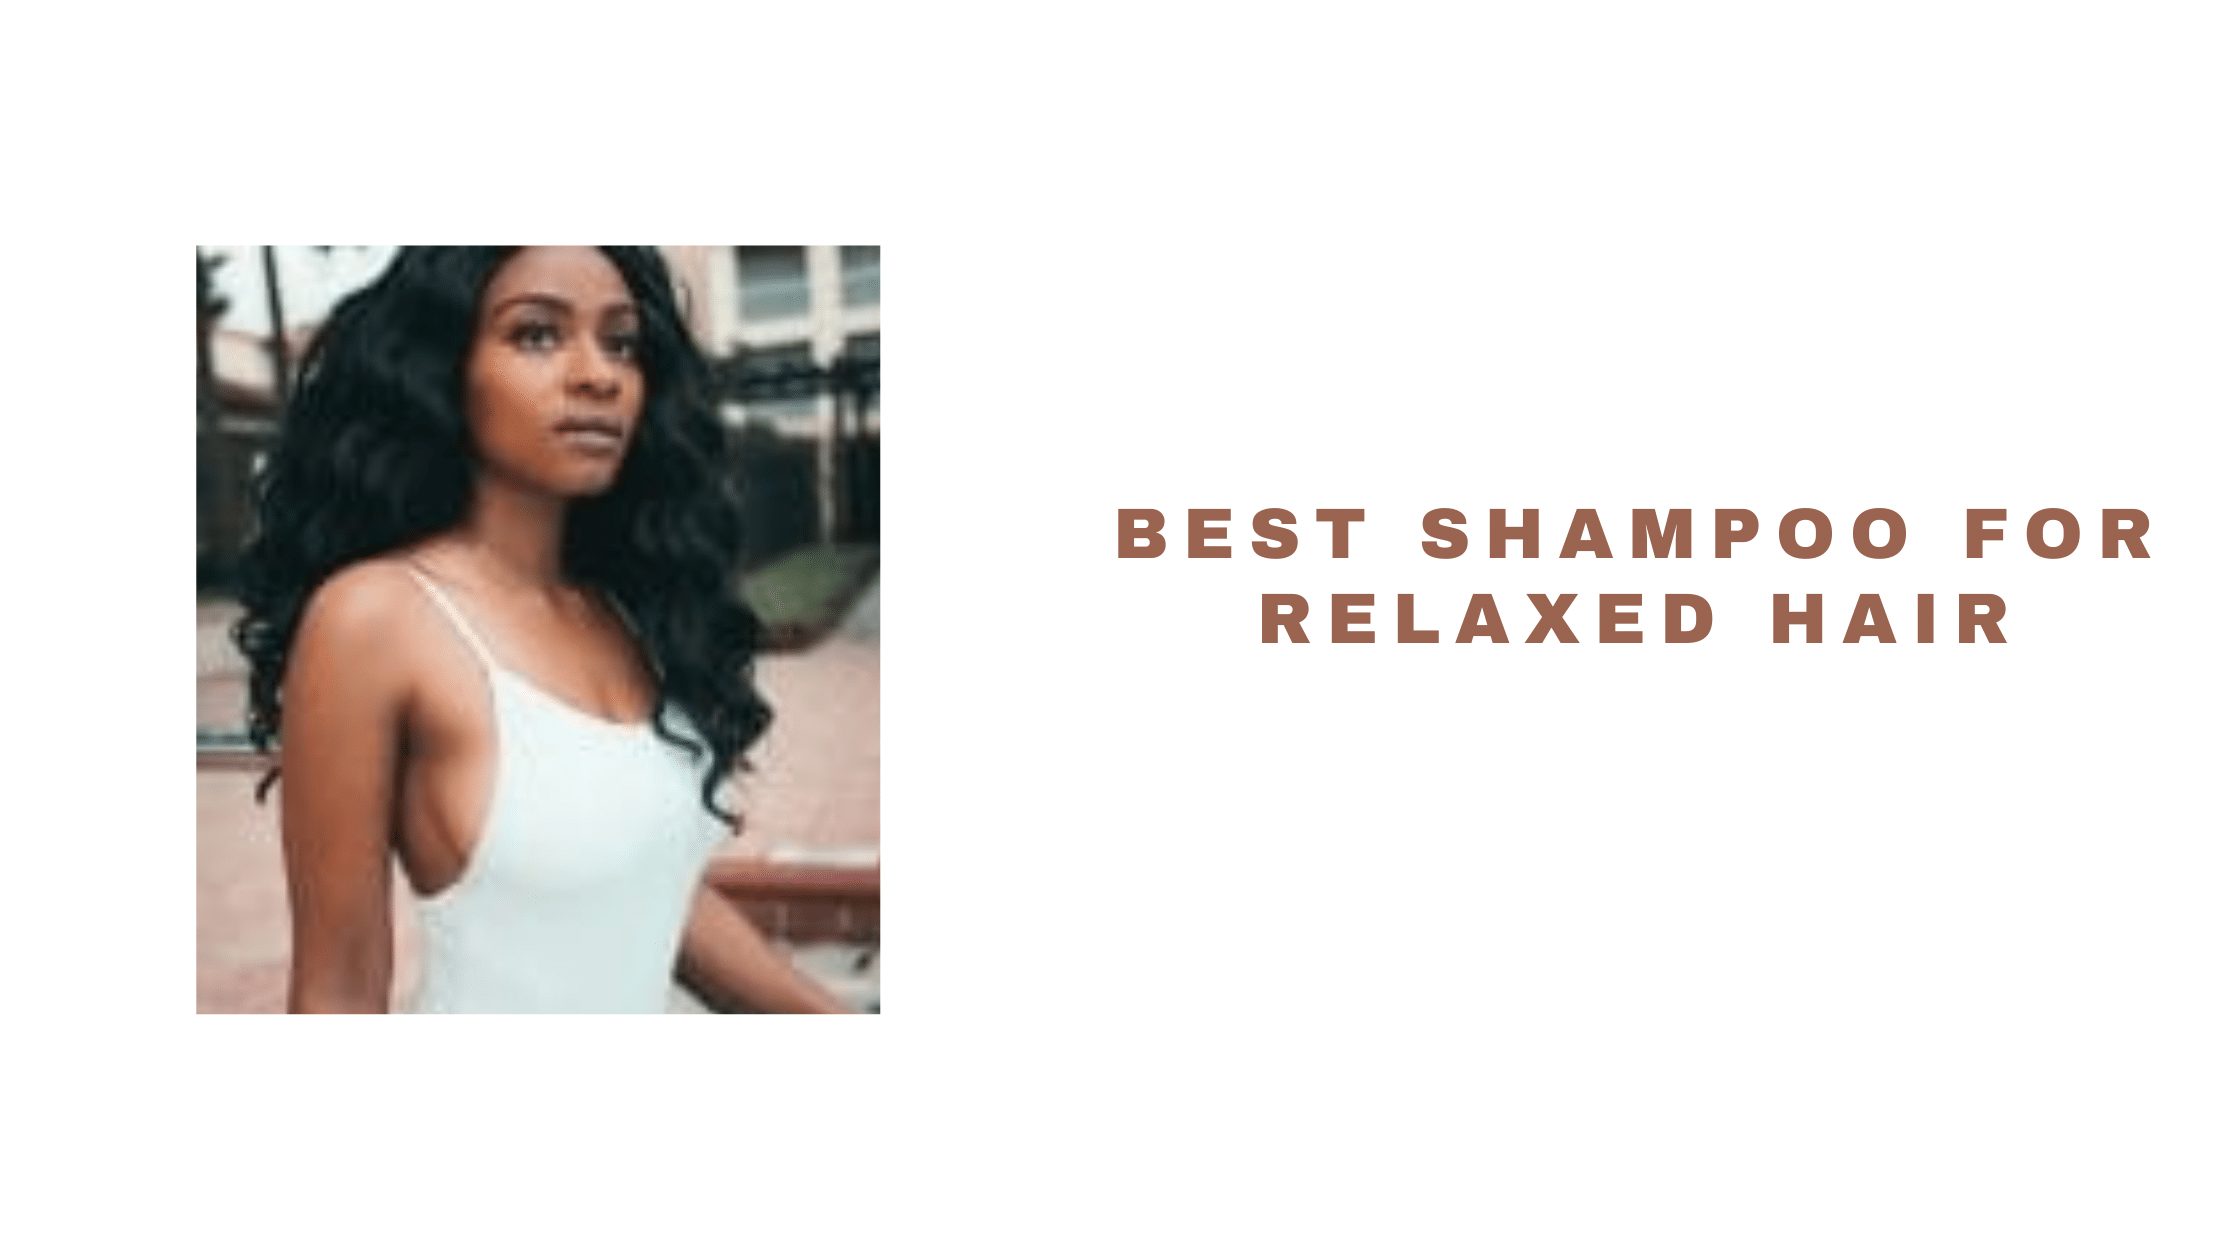 Best Shampoo For Relaxed Hair 2021